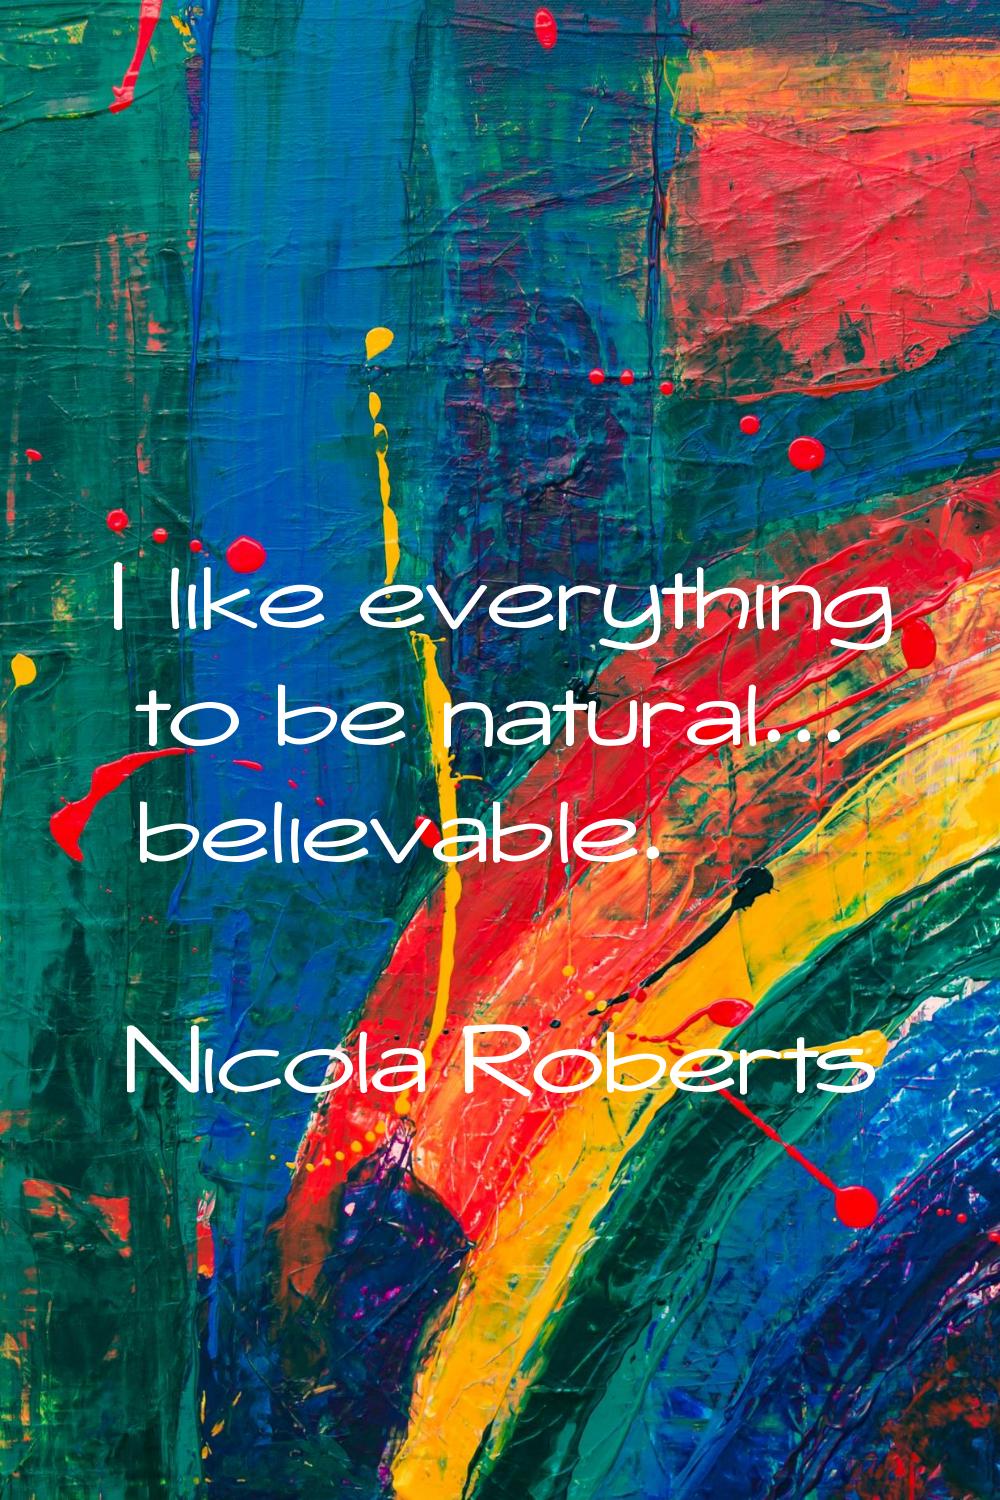 I like everything to be natural... believable.